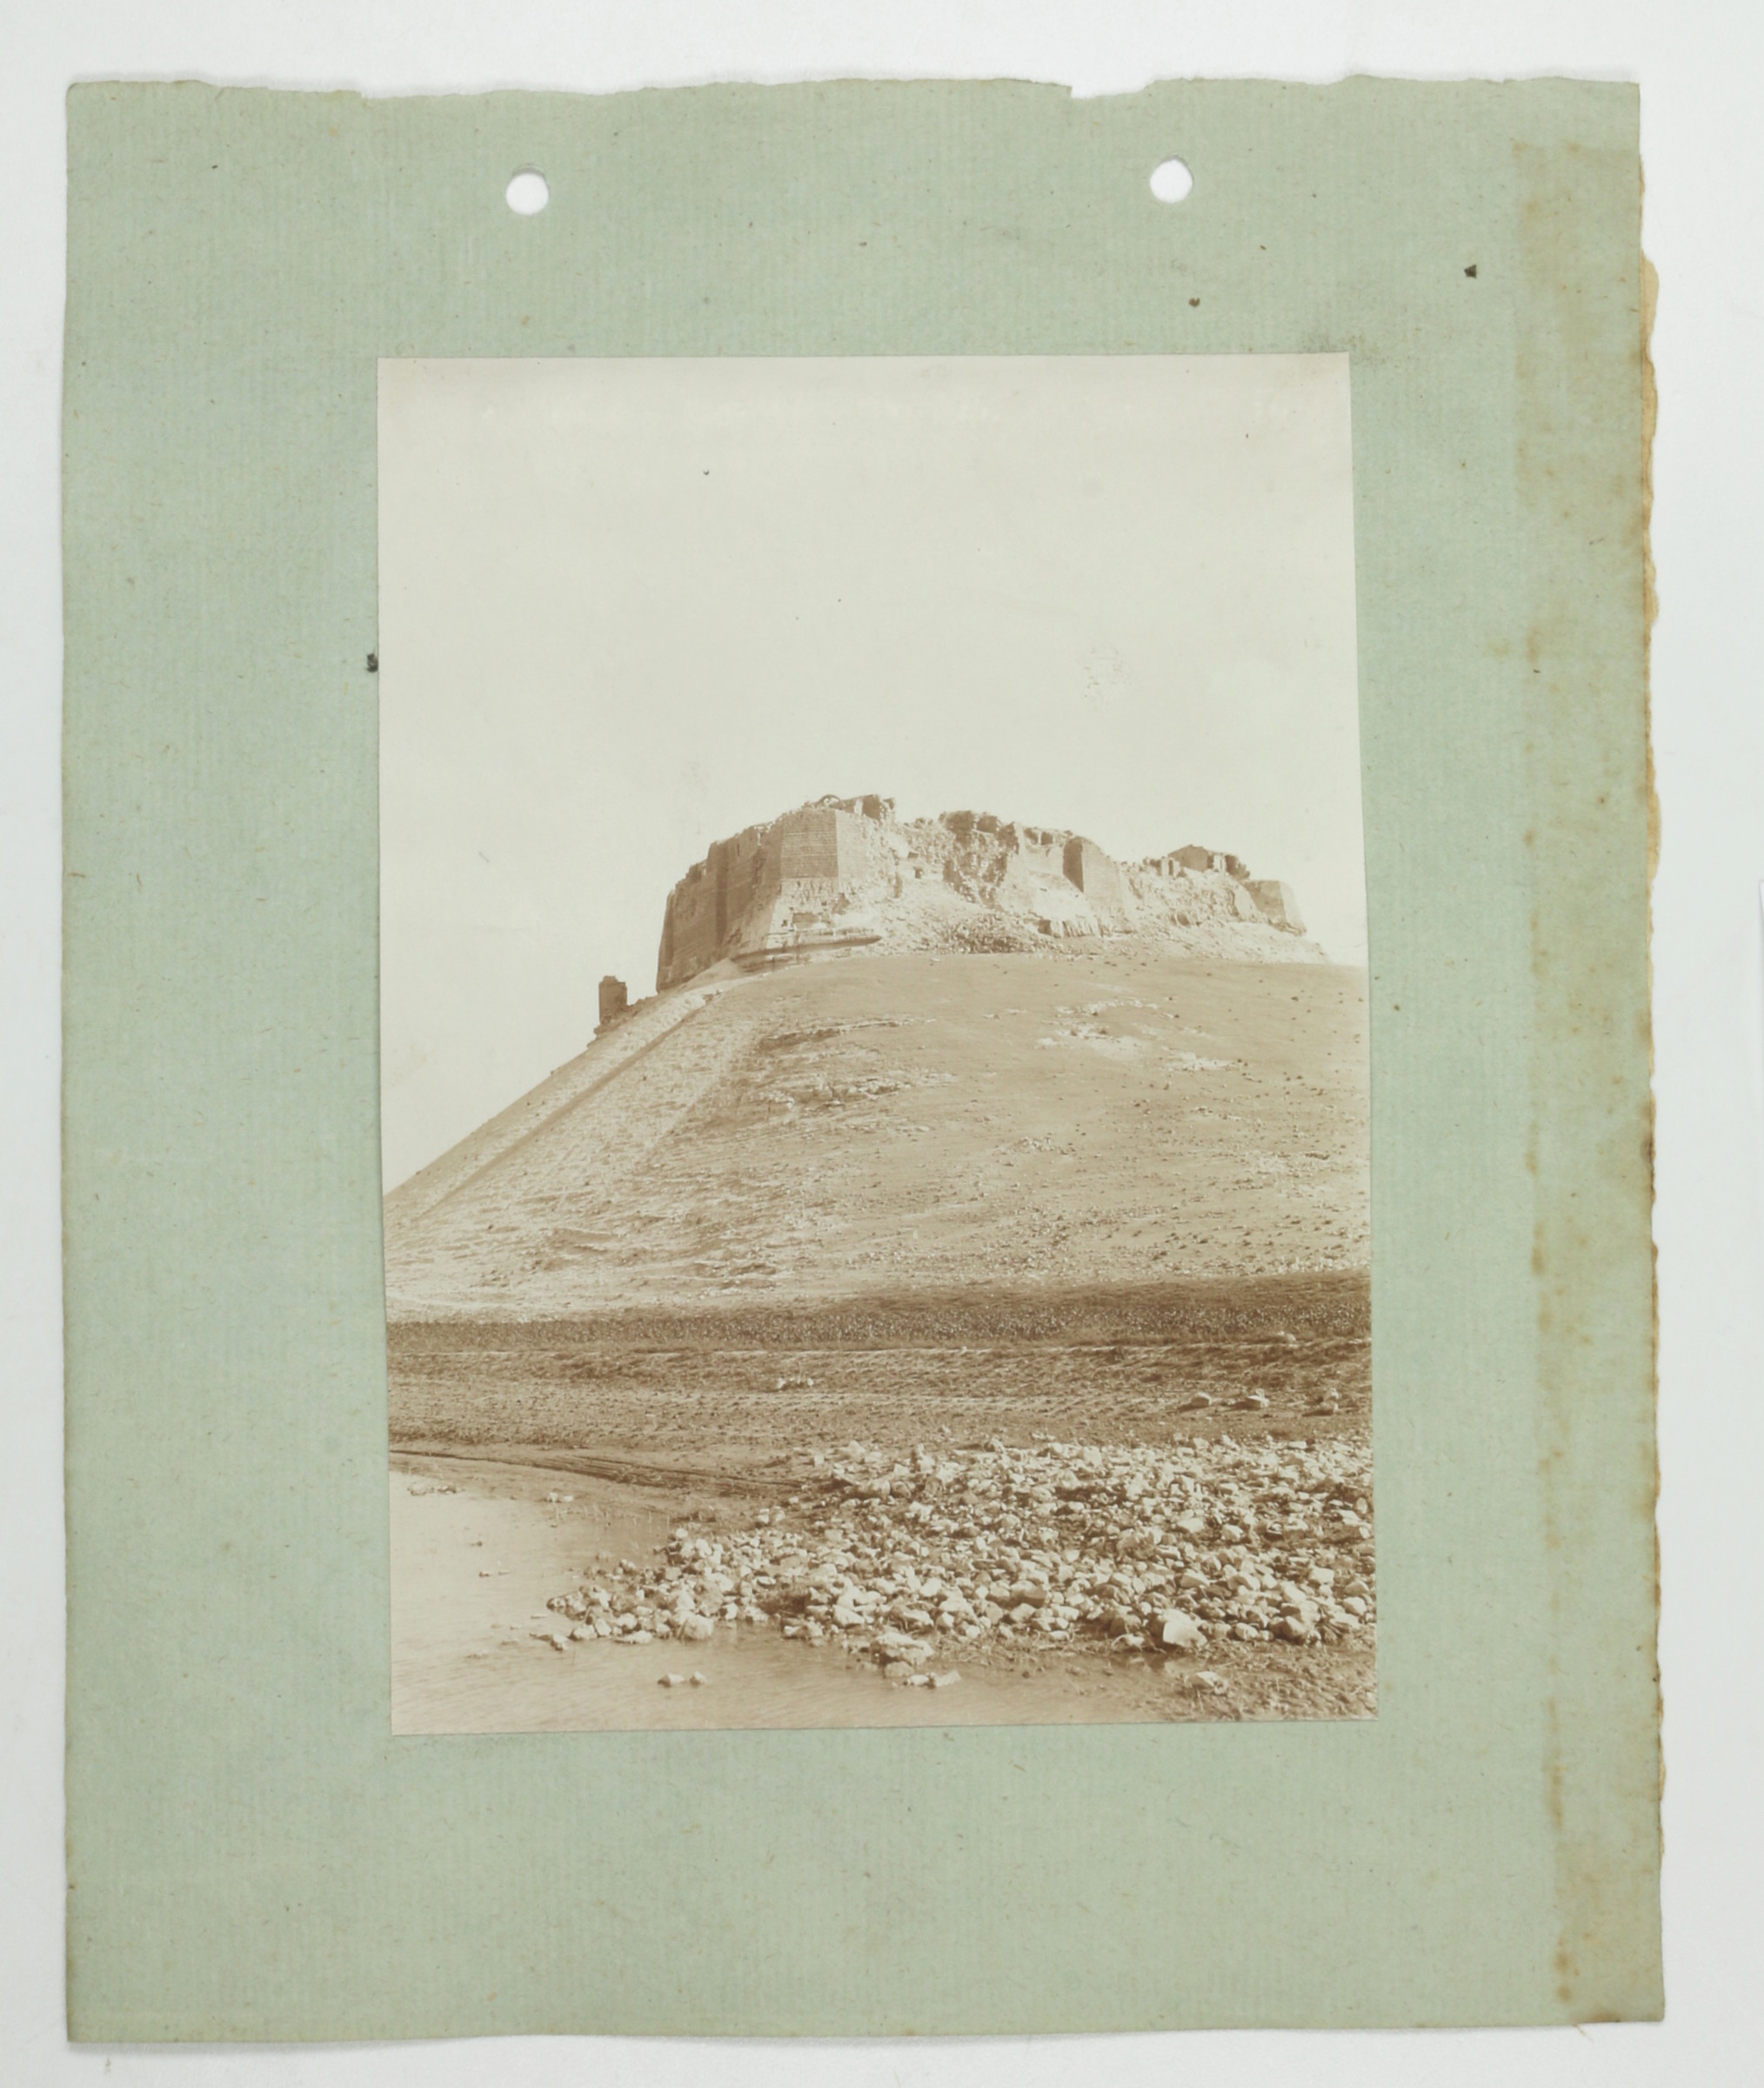 From Cairo to Tell Halaf, The Max von Oppenheim Photo Collection